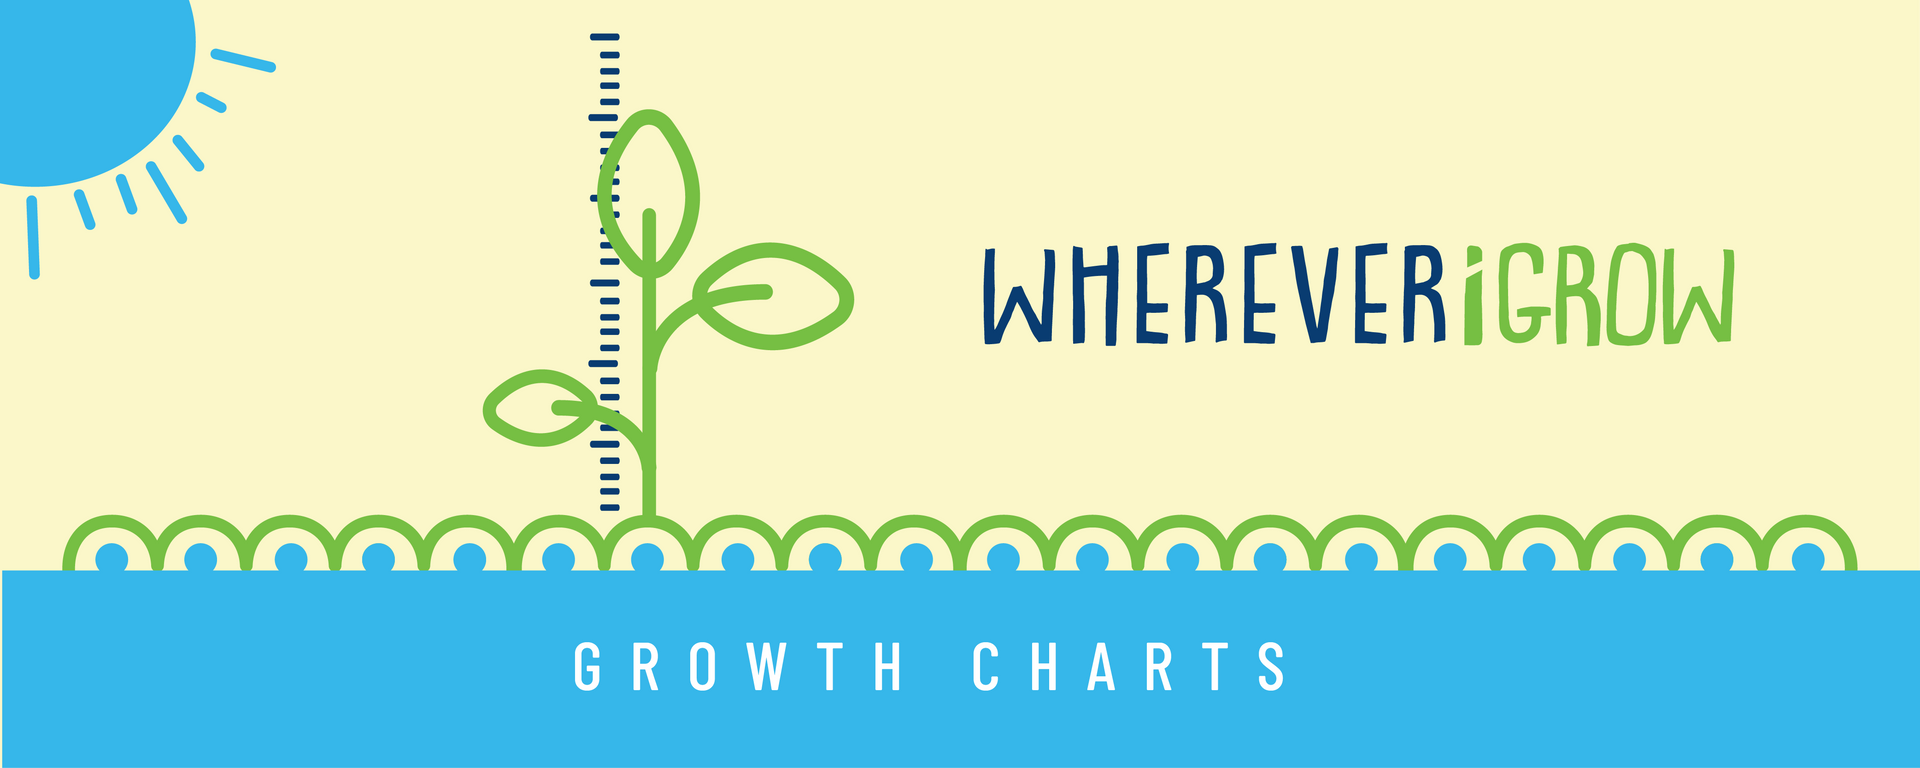 Load video: Customized Growth Chart